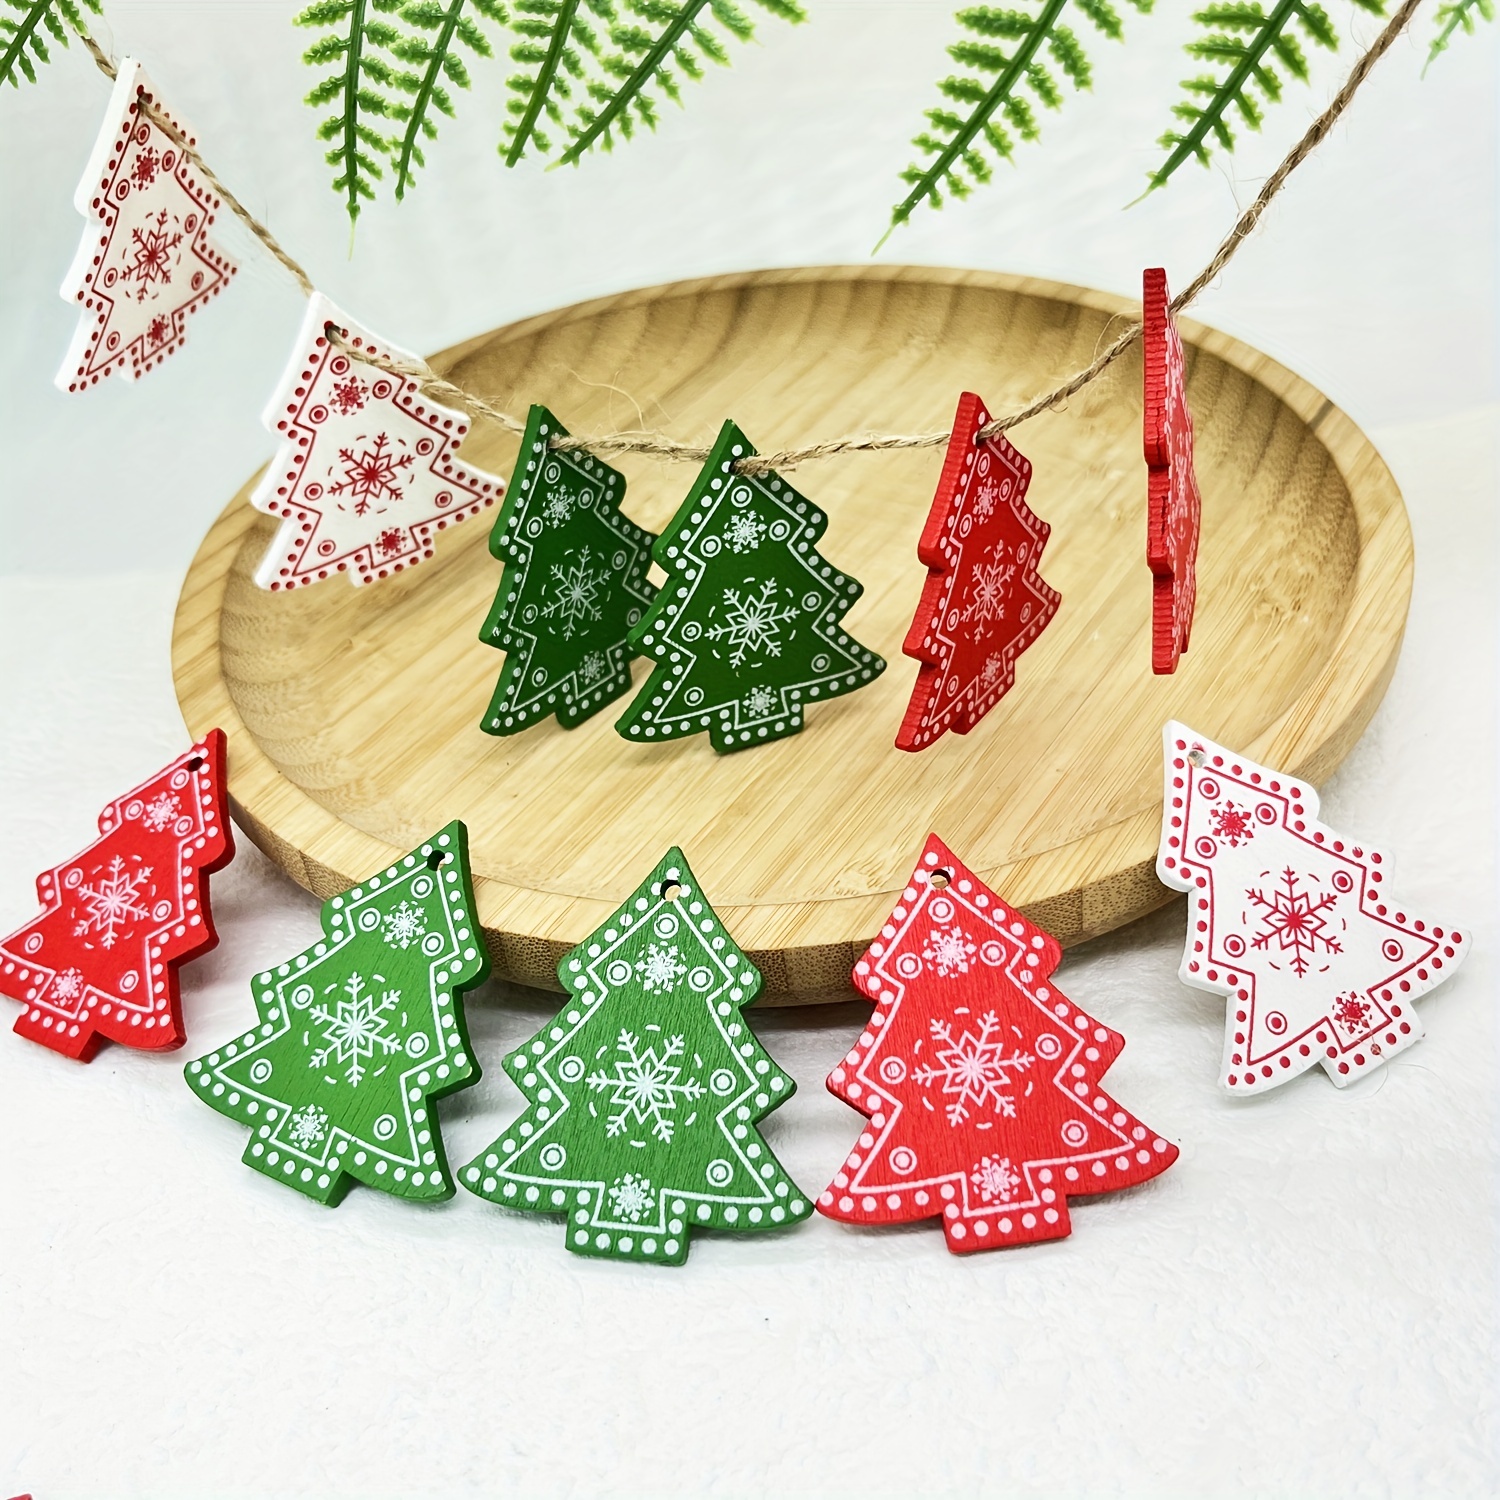 30pcs/set Christmas Snowflake Decorations, Artificial Snowflakes Pendant  With Woolen String, Christmas Tree Ornaments